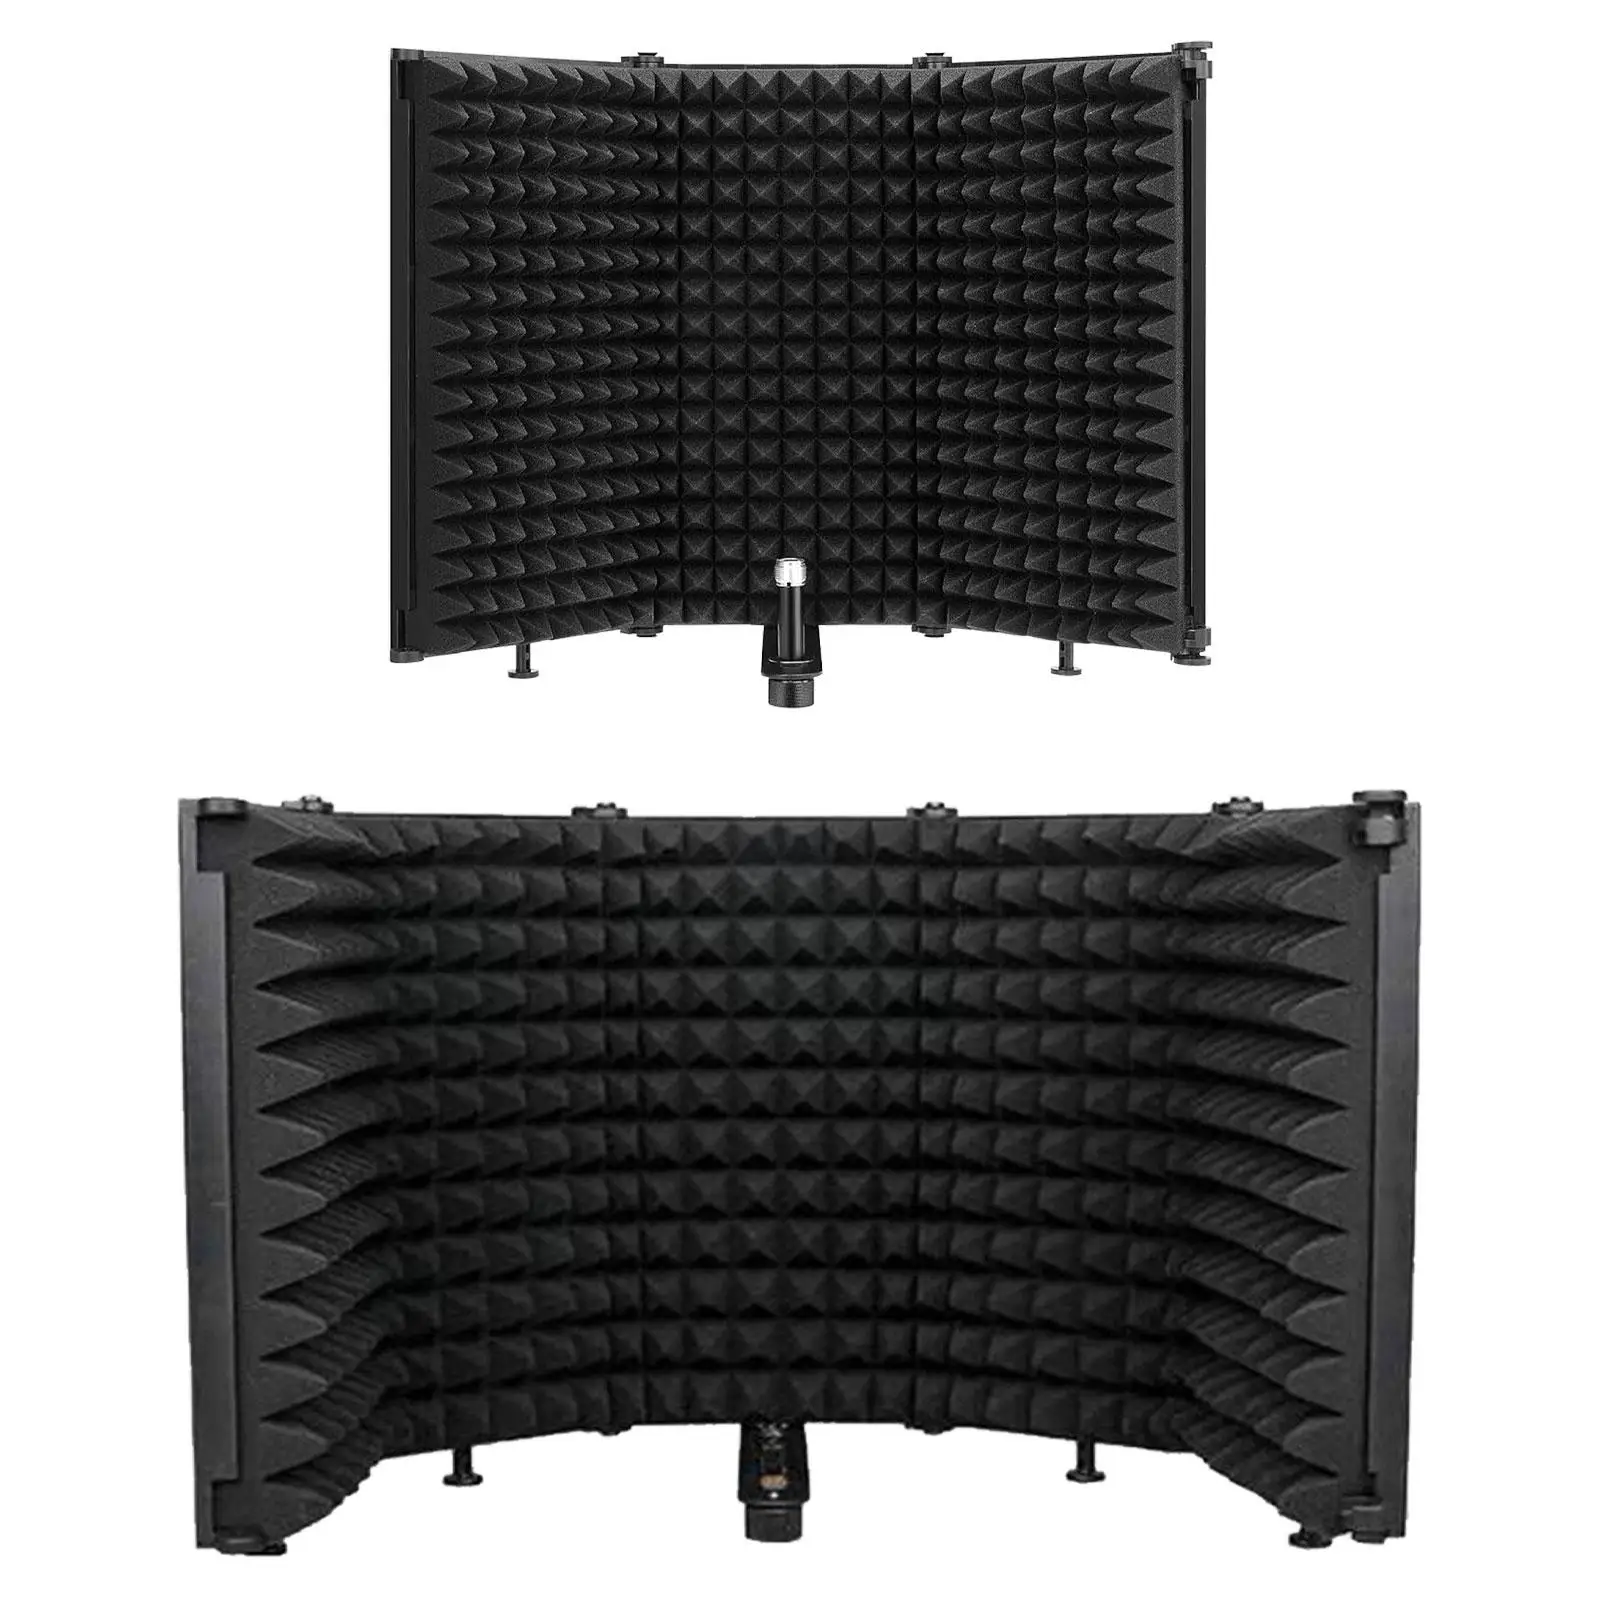 

Microphone Isolation Shield Studio Mic Sound Absorbing Foam Reflector for Singing Podcasts Daily Use Studio Broadcasting